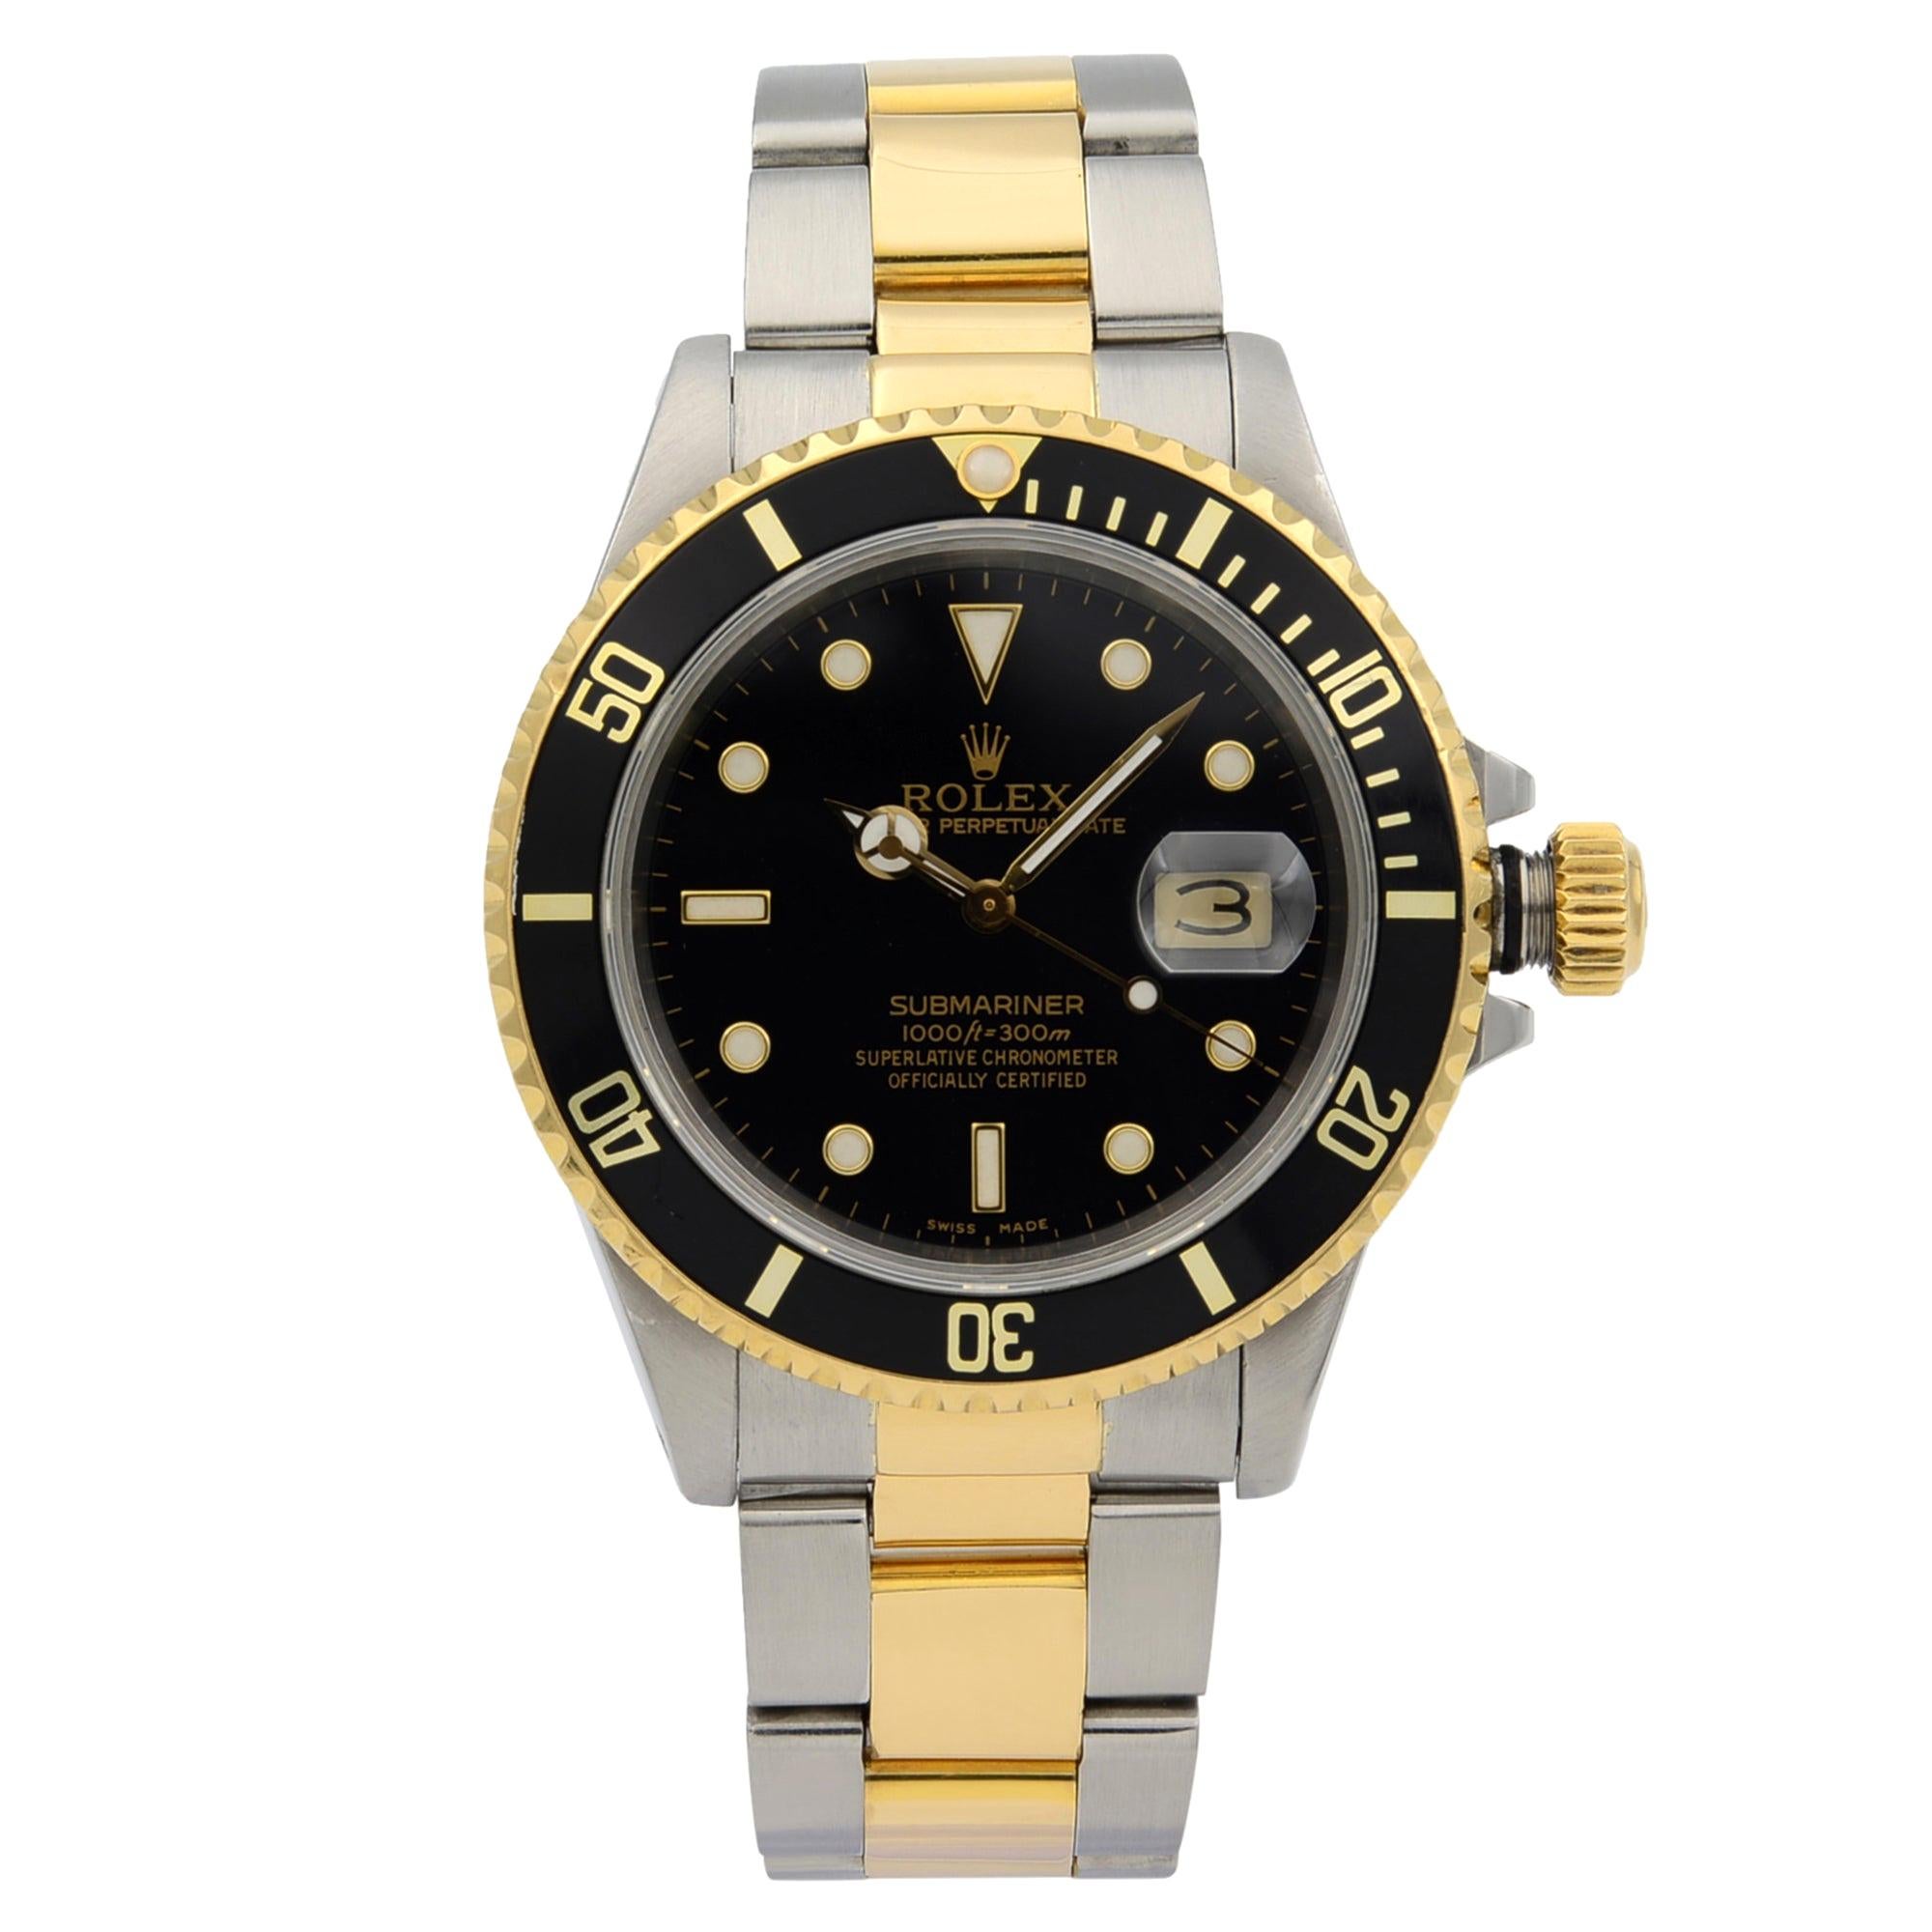 Rolex Submariner Steel 18K Yellow Gold Black Dial Automatic Men's Watch 16803